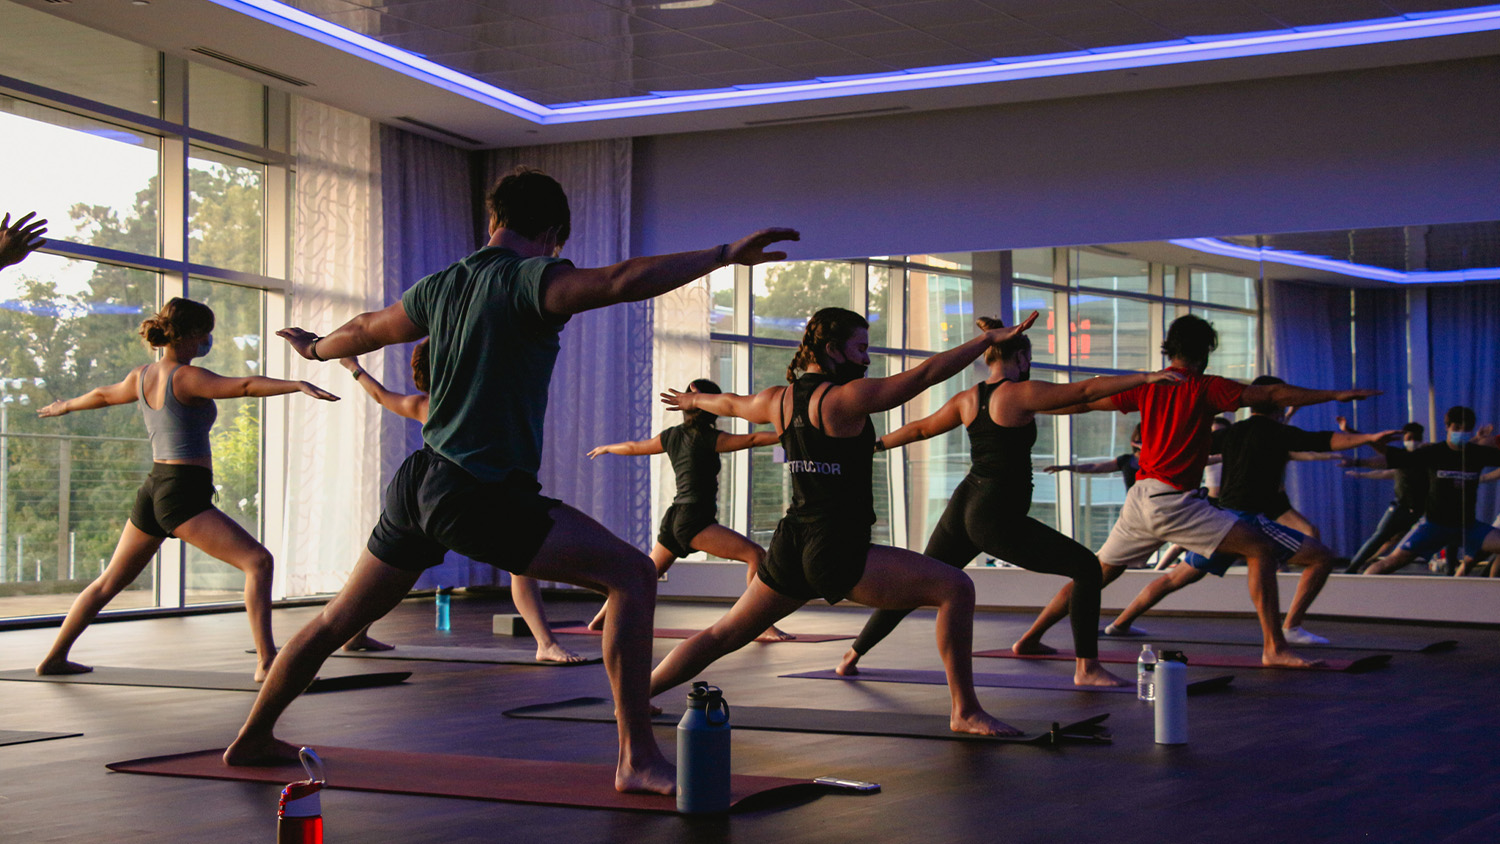 Students perform yoga poses in a group class